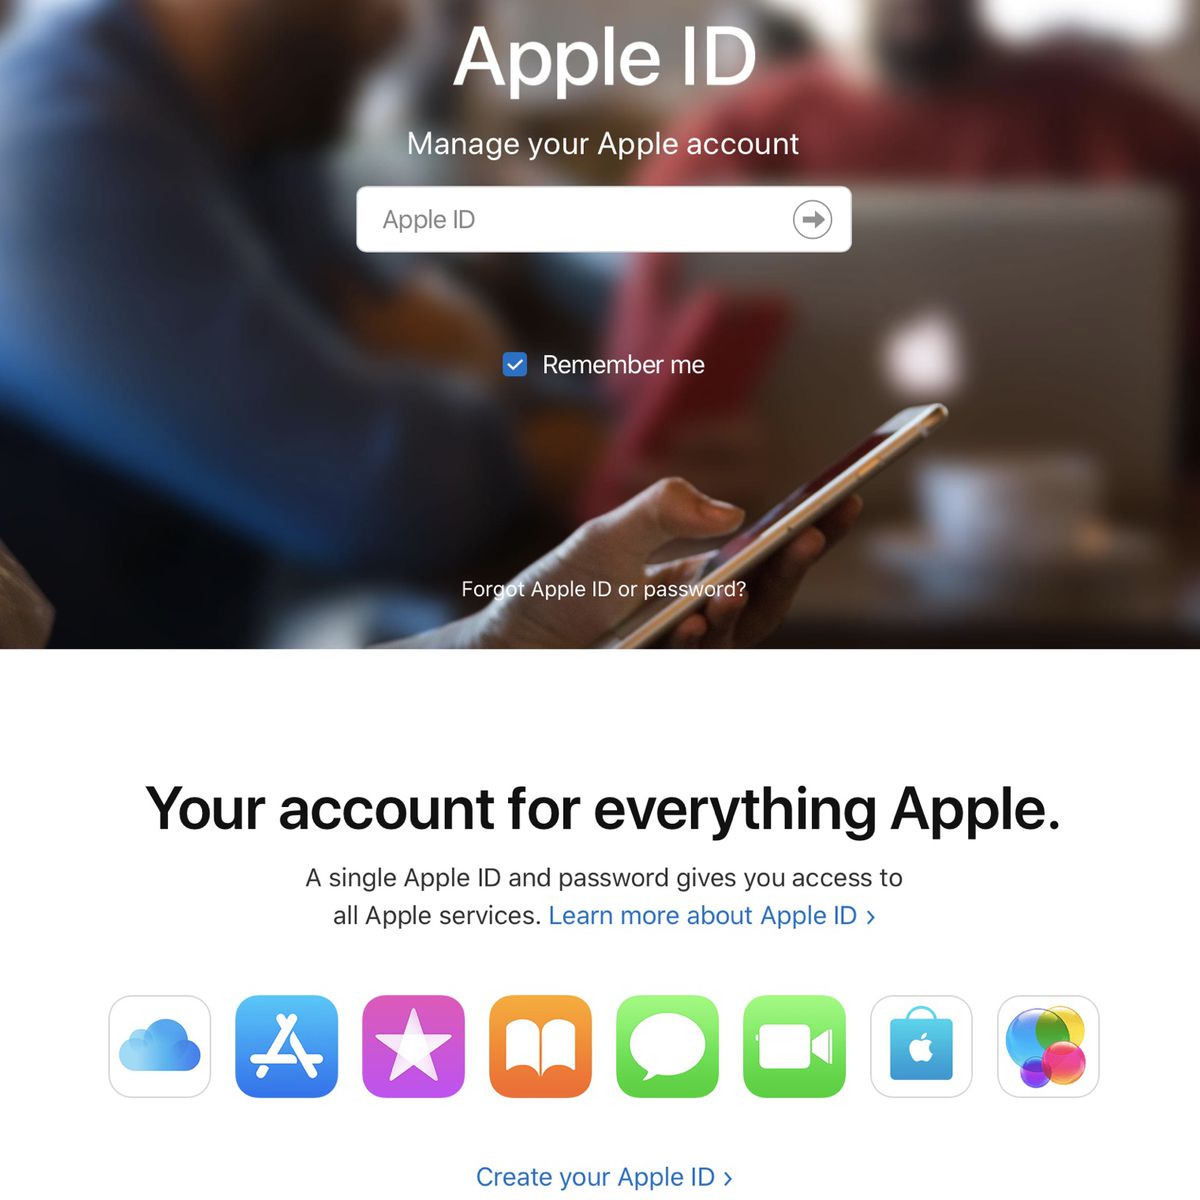 Three ways to add an iCloud.com address, even if you already have one